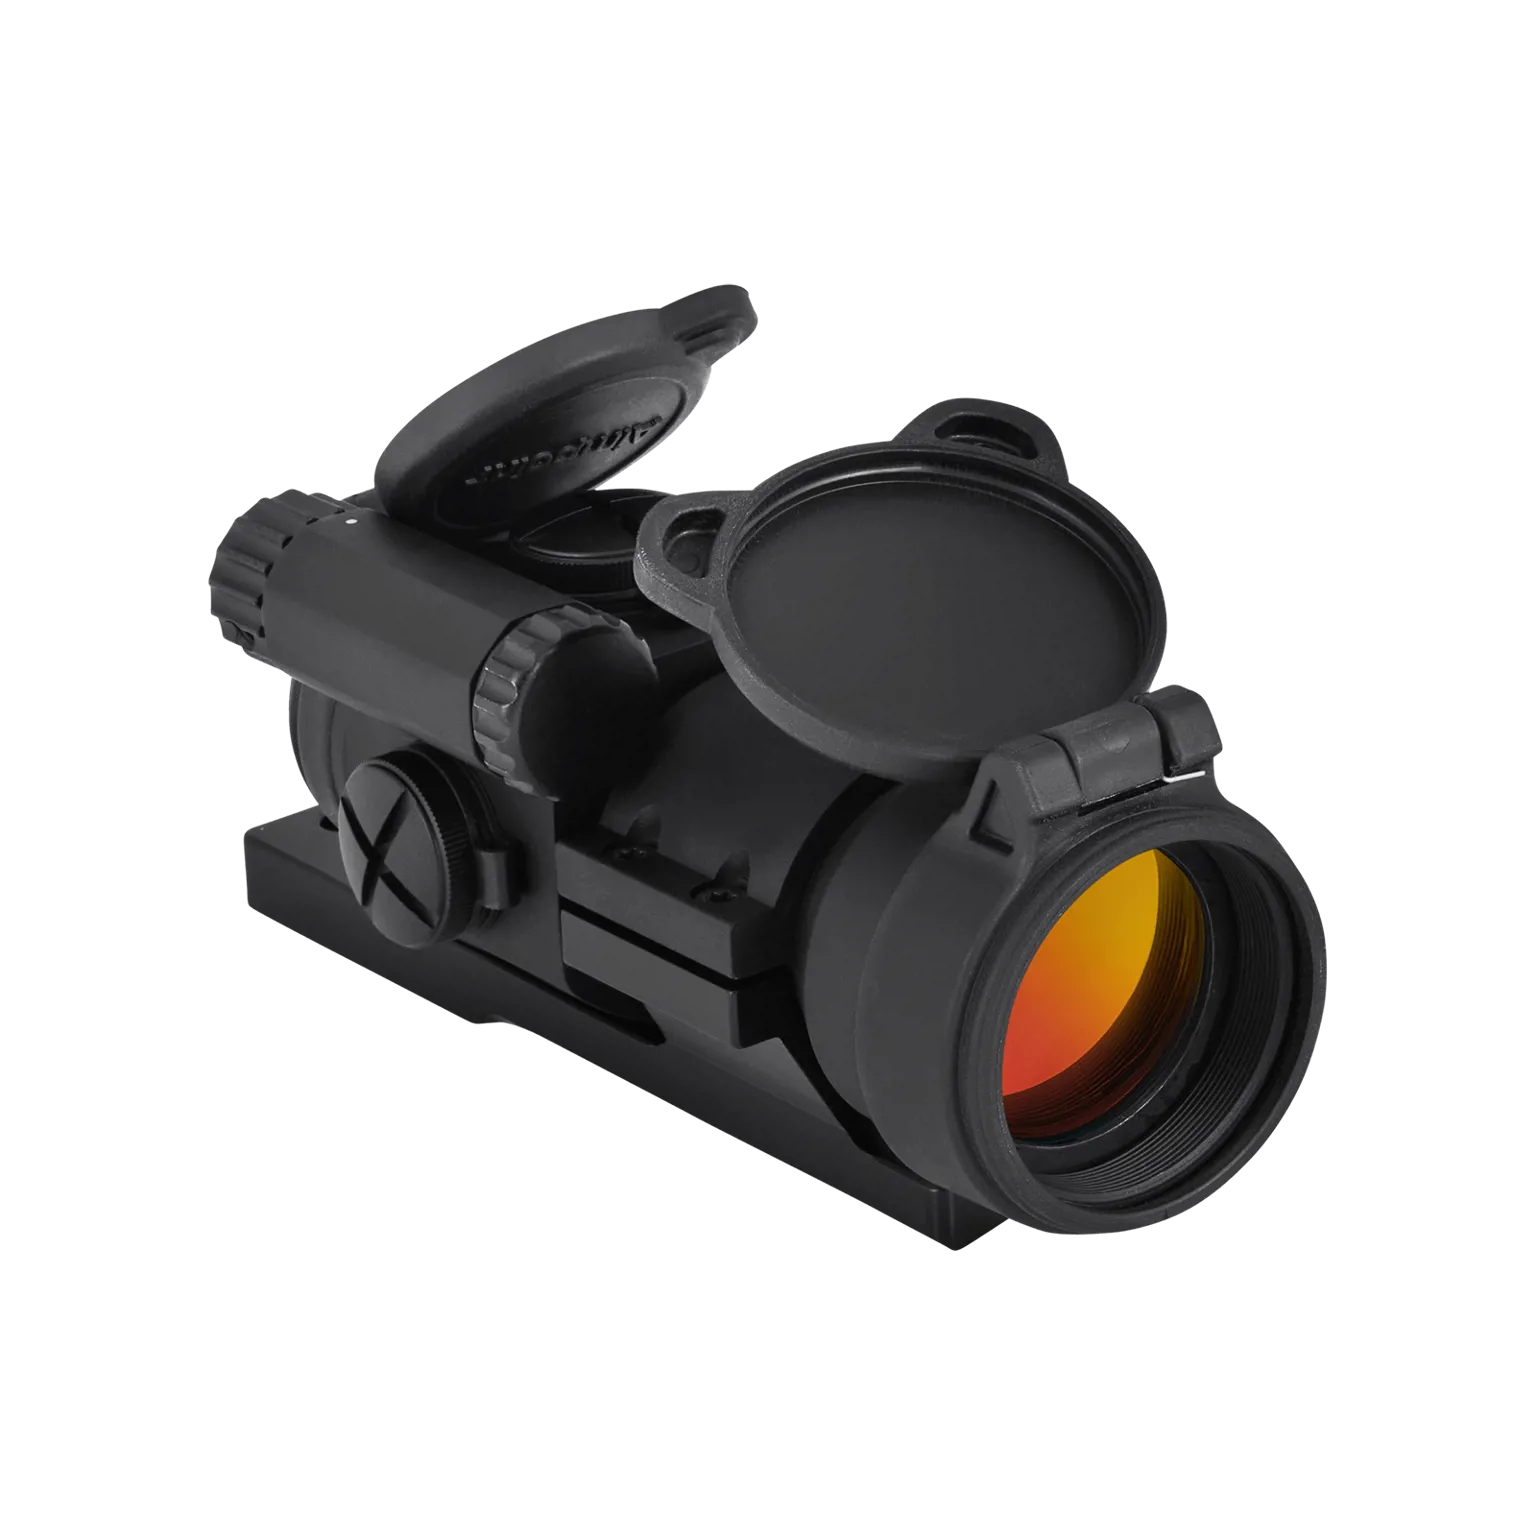 CompC3™ 2 MOA - Red dot reflex sight with mount for semi-automatic rifles - 3